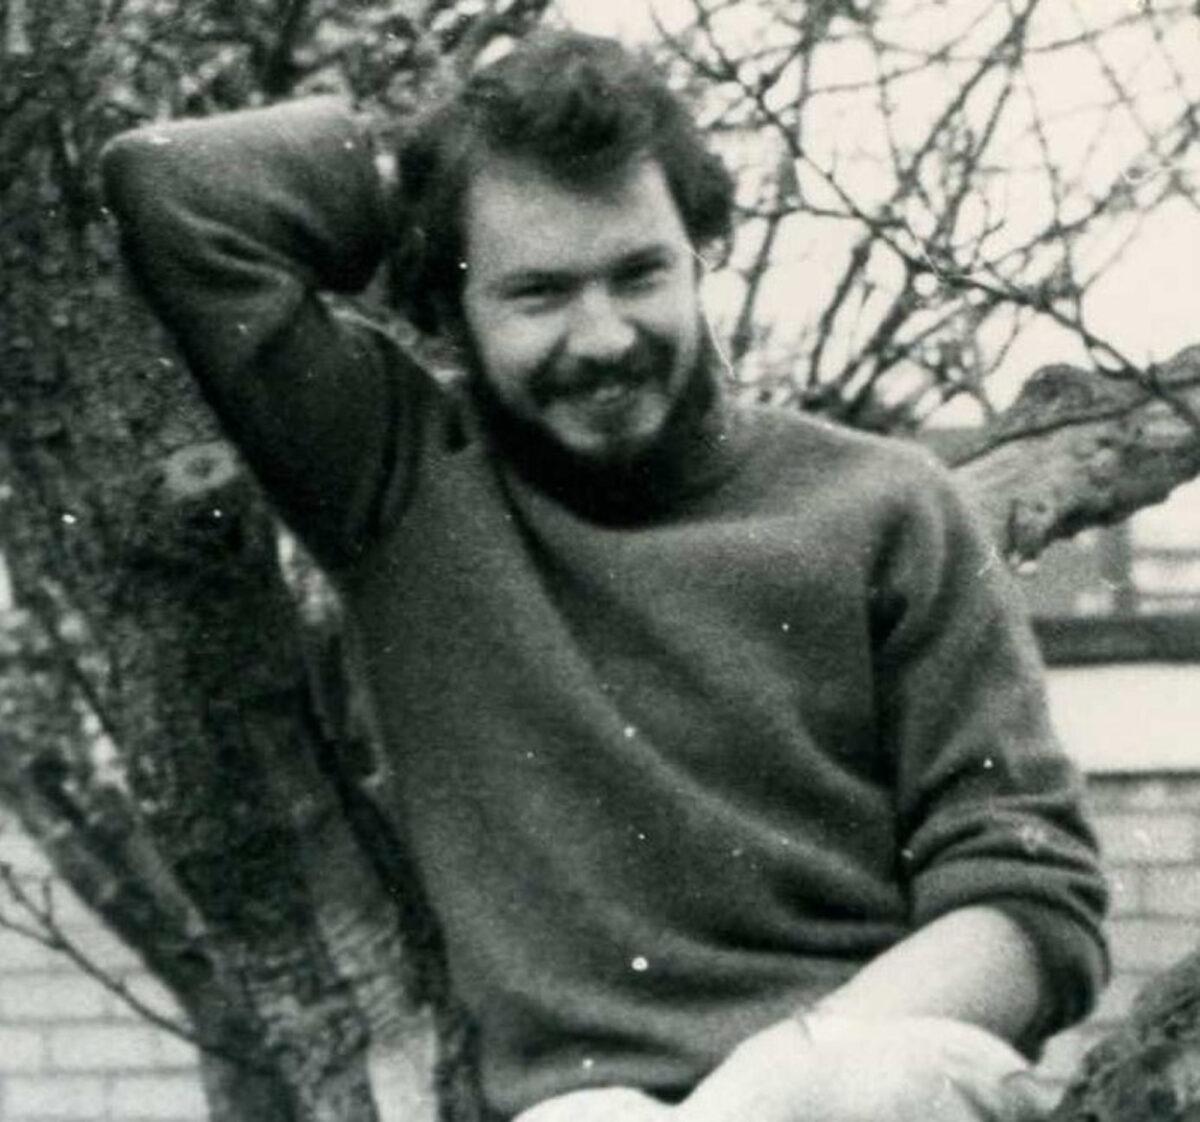 Undated photo of Daniel Morgan, a private investigator who was killed with an axe in the car park of the Golden Lion pub in Sydenham, south-east London on March 10, 1987. (Family handout via PA)